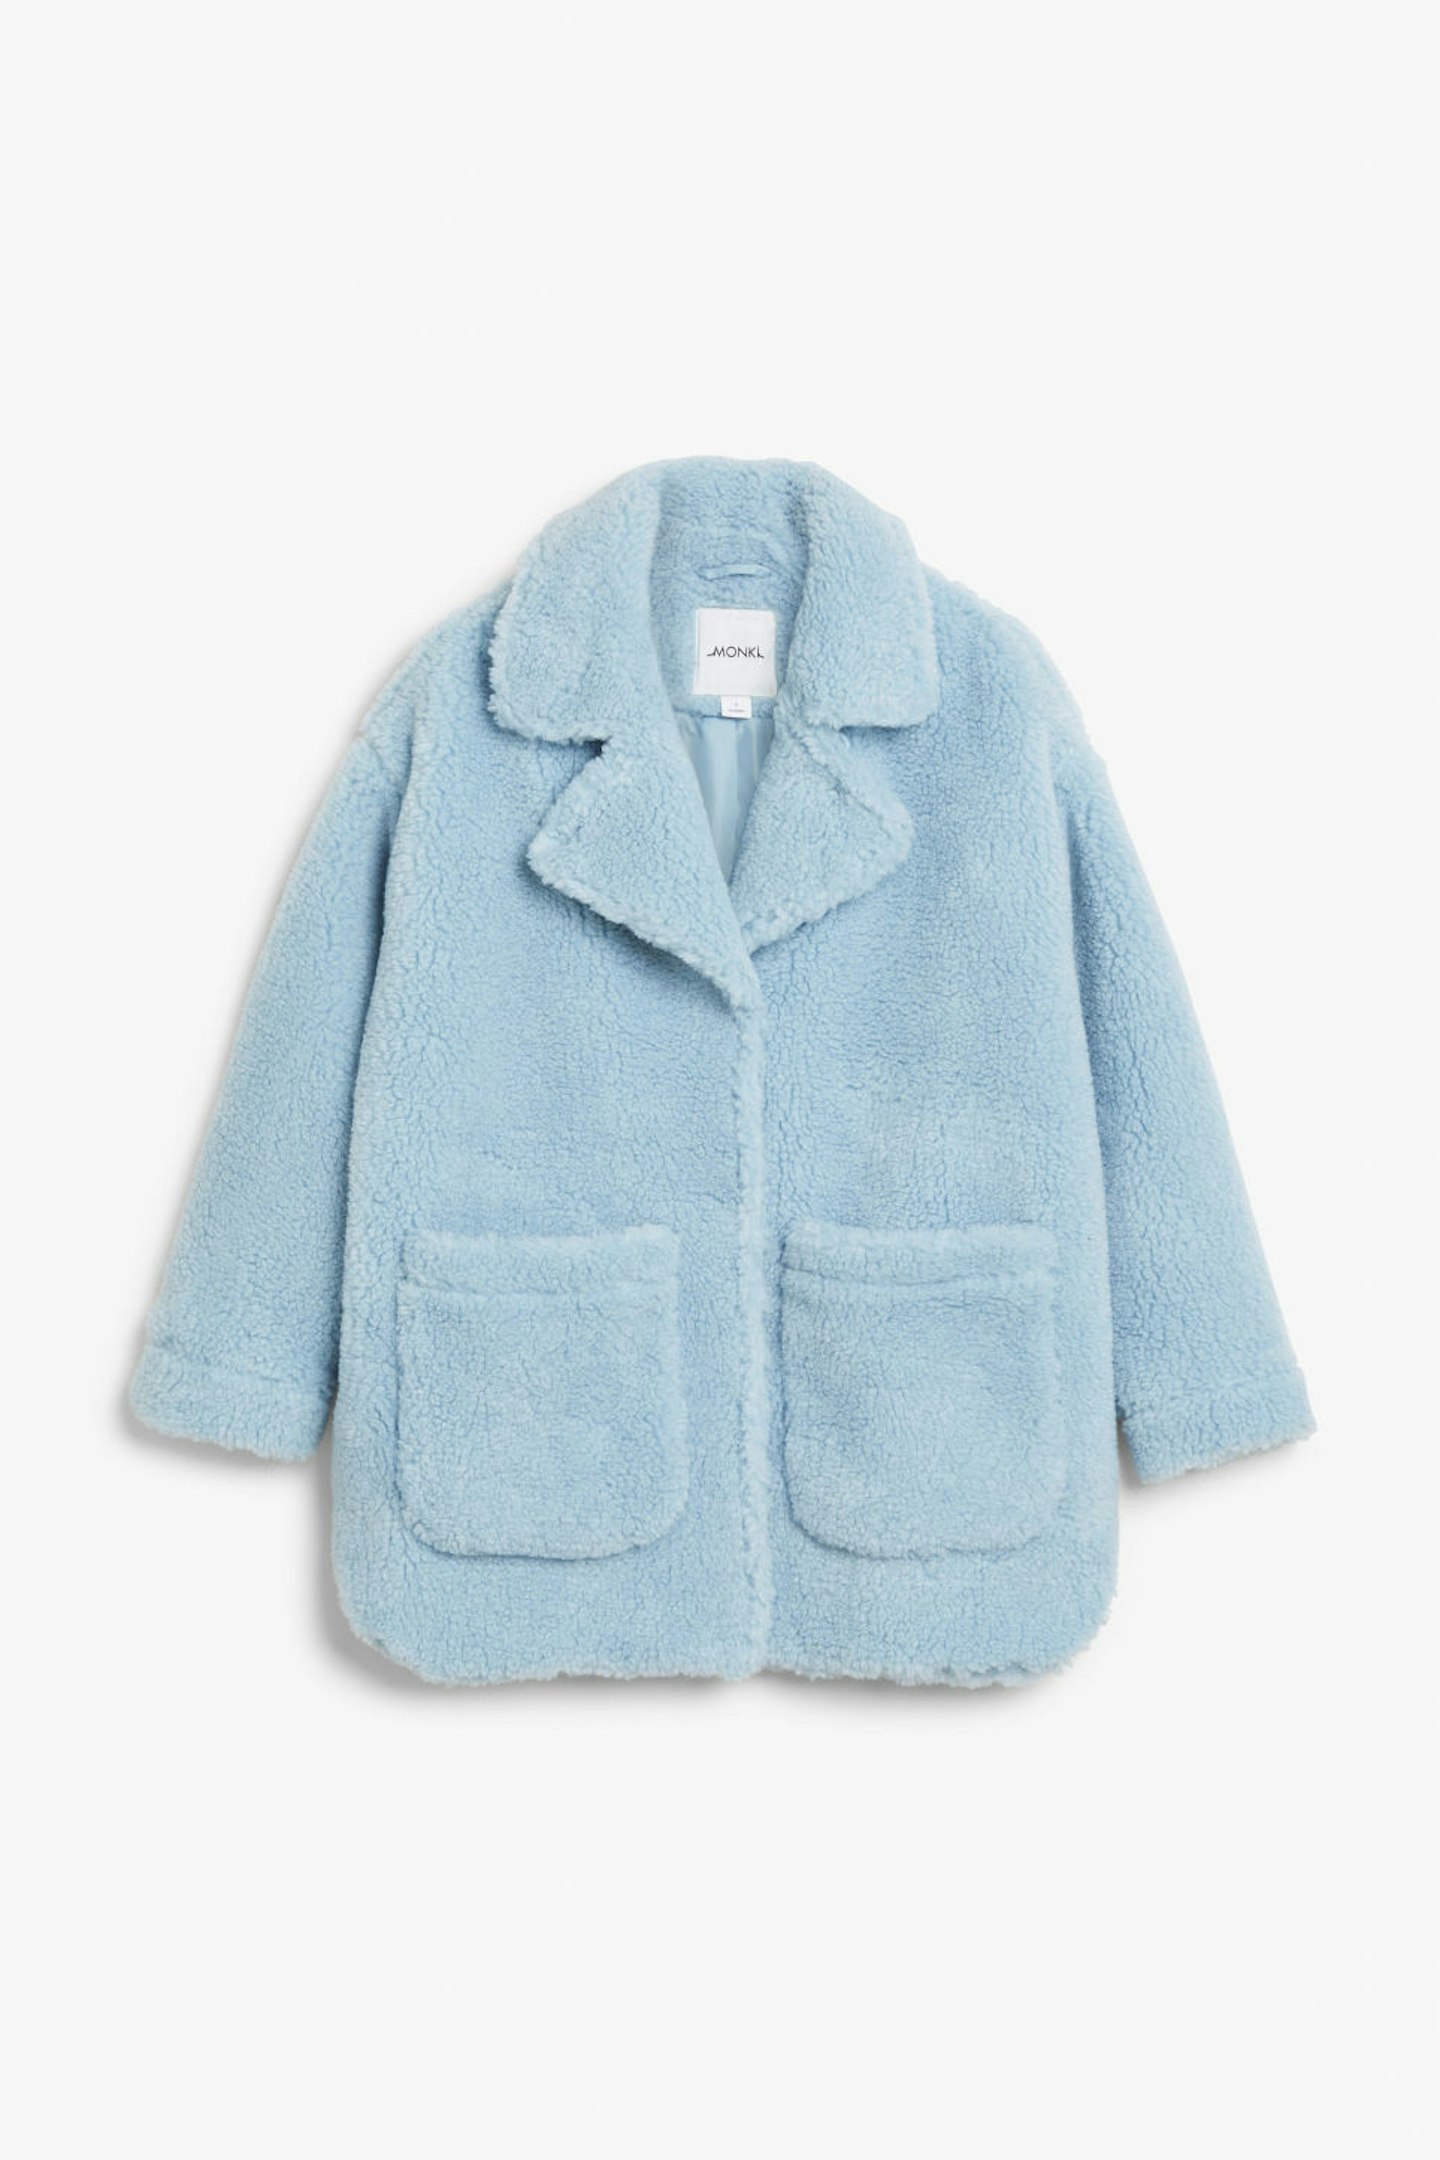 The Only 4 Coat Trends To Care About | %%channel_name%%